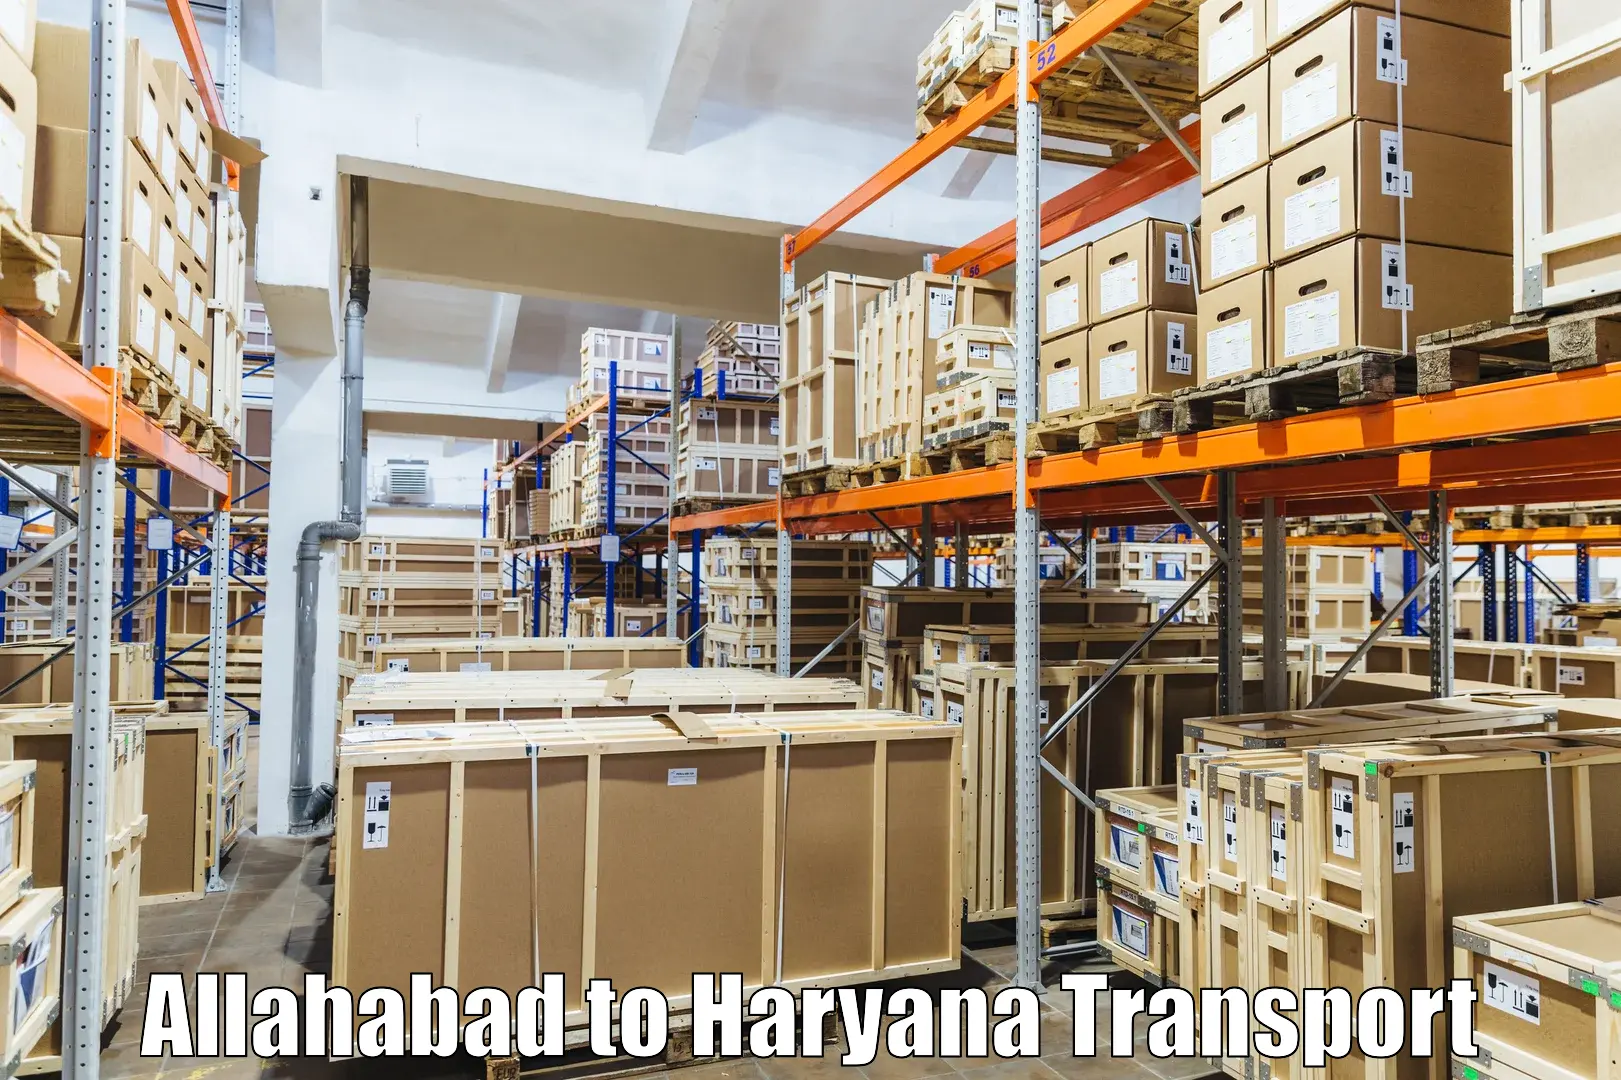 Transport shared services Allahabad to Gurugram